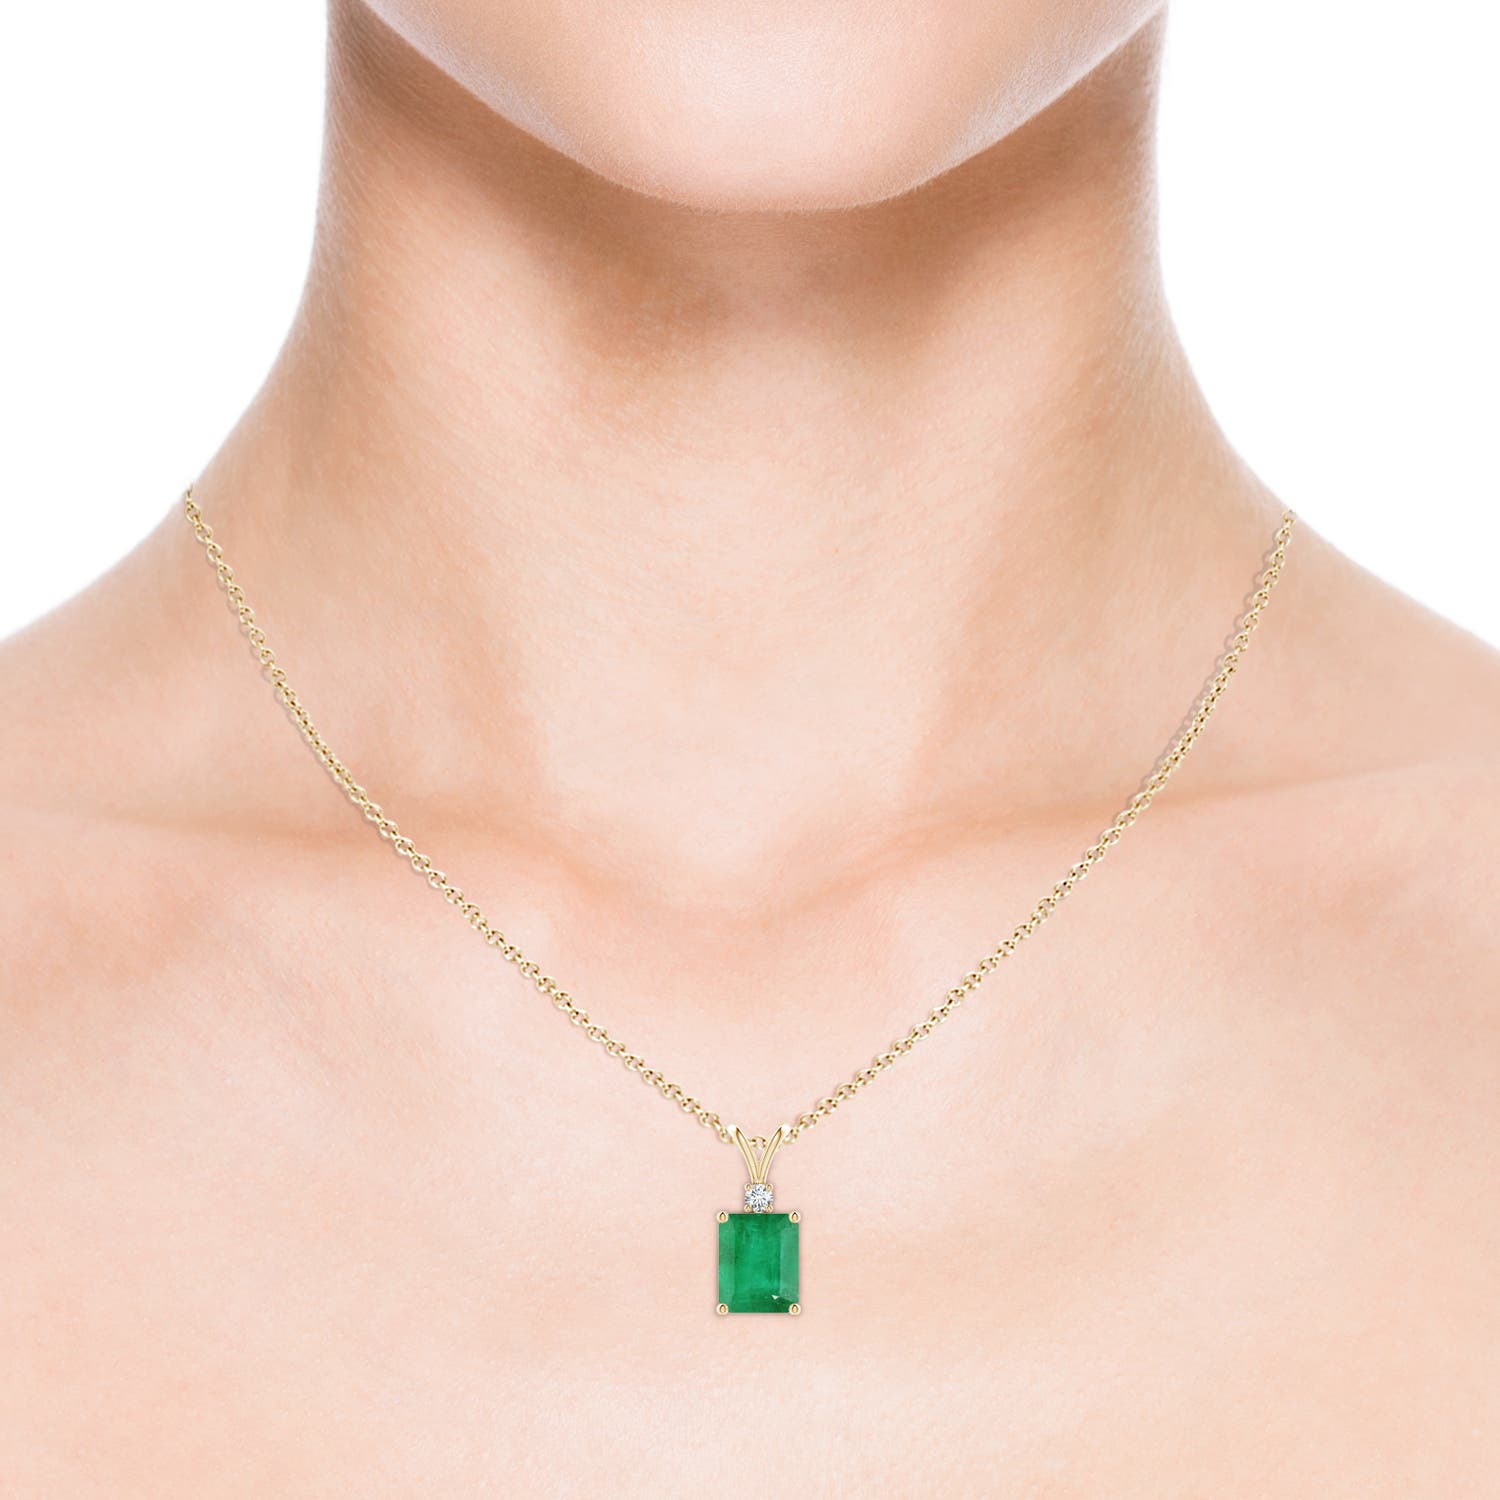 A - Emerald / 2.96 CT / 14 KT Yellow Gold